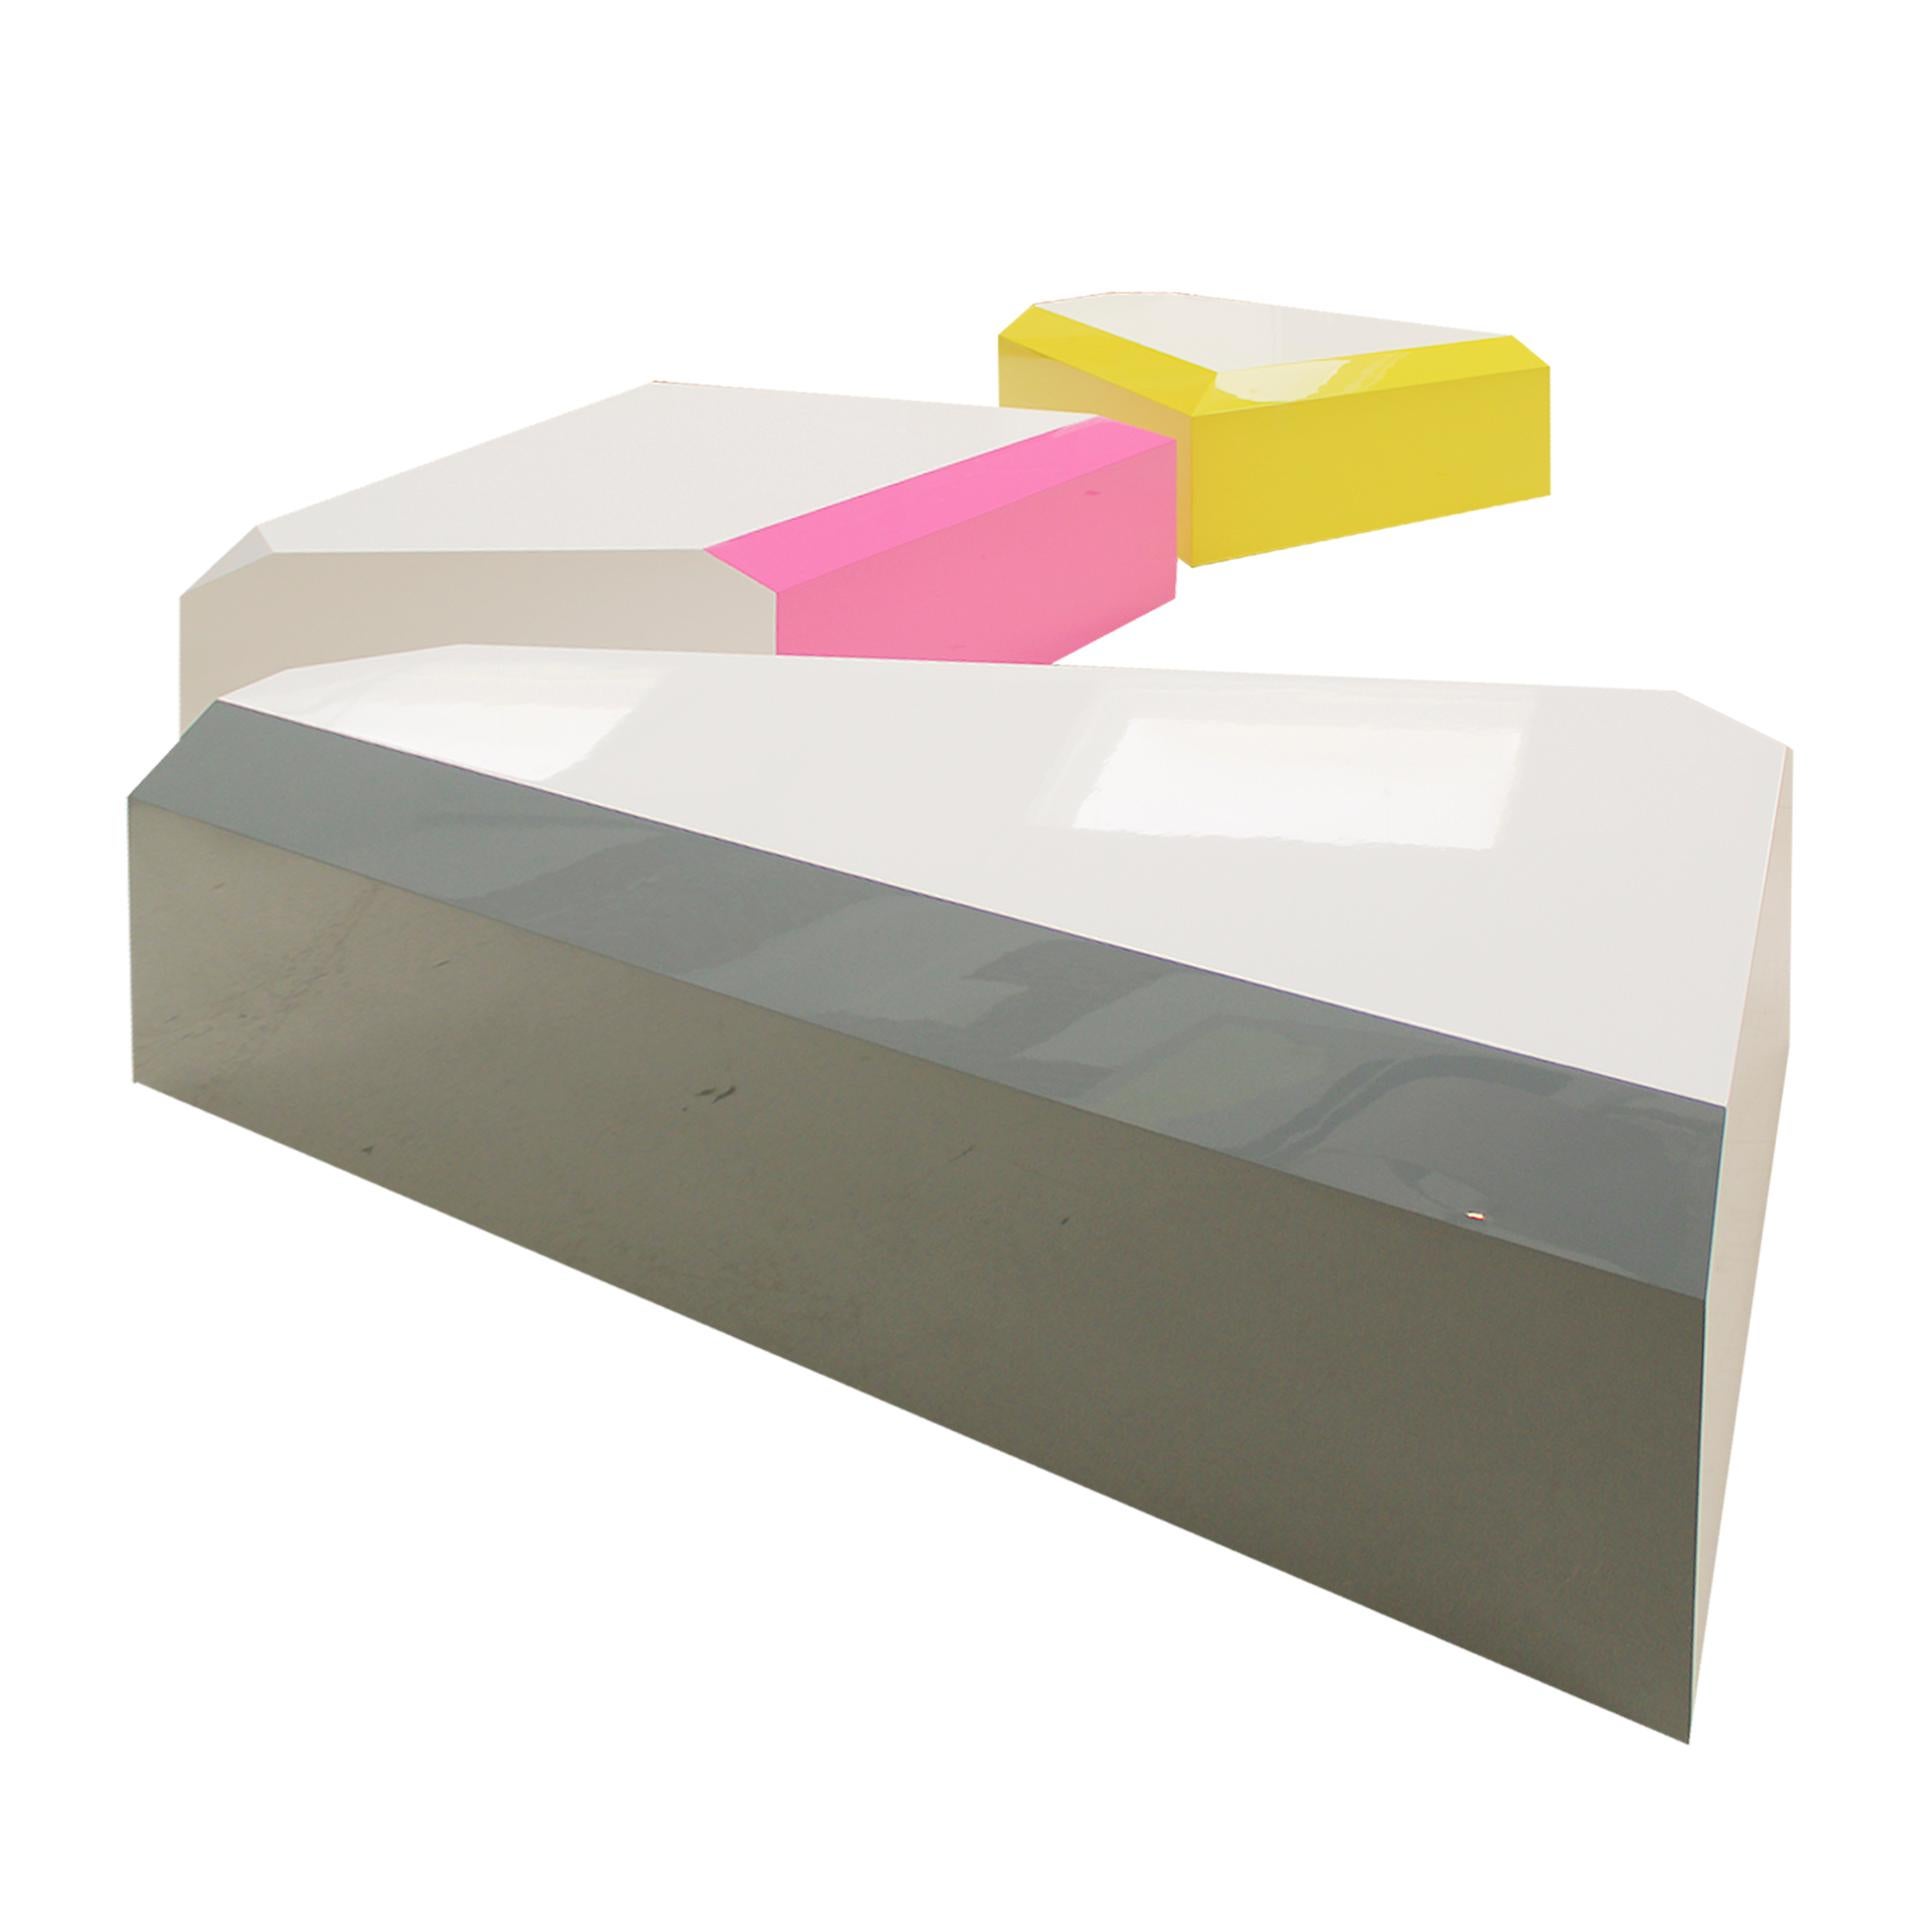 Contemporary Modular Coffee Table Made In Coloured Lacquered Wood With Gloss FInish For Sale